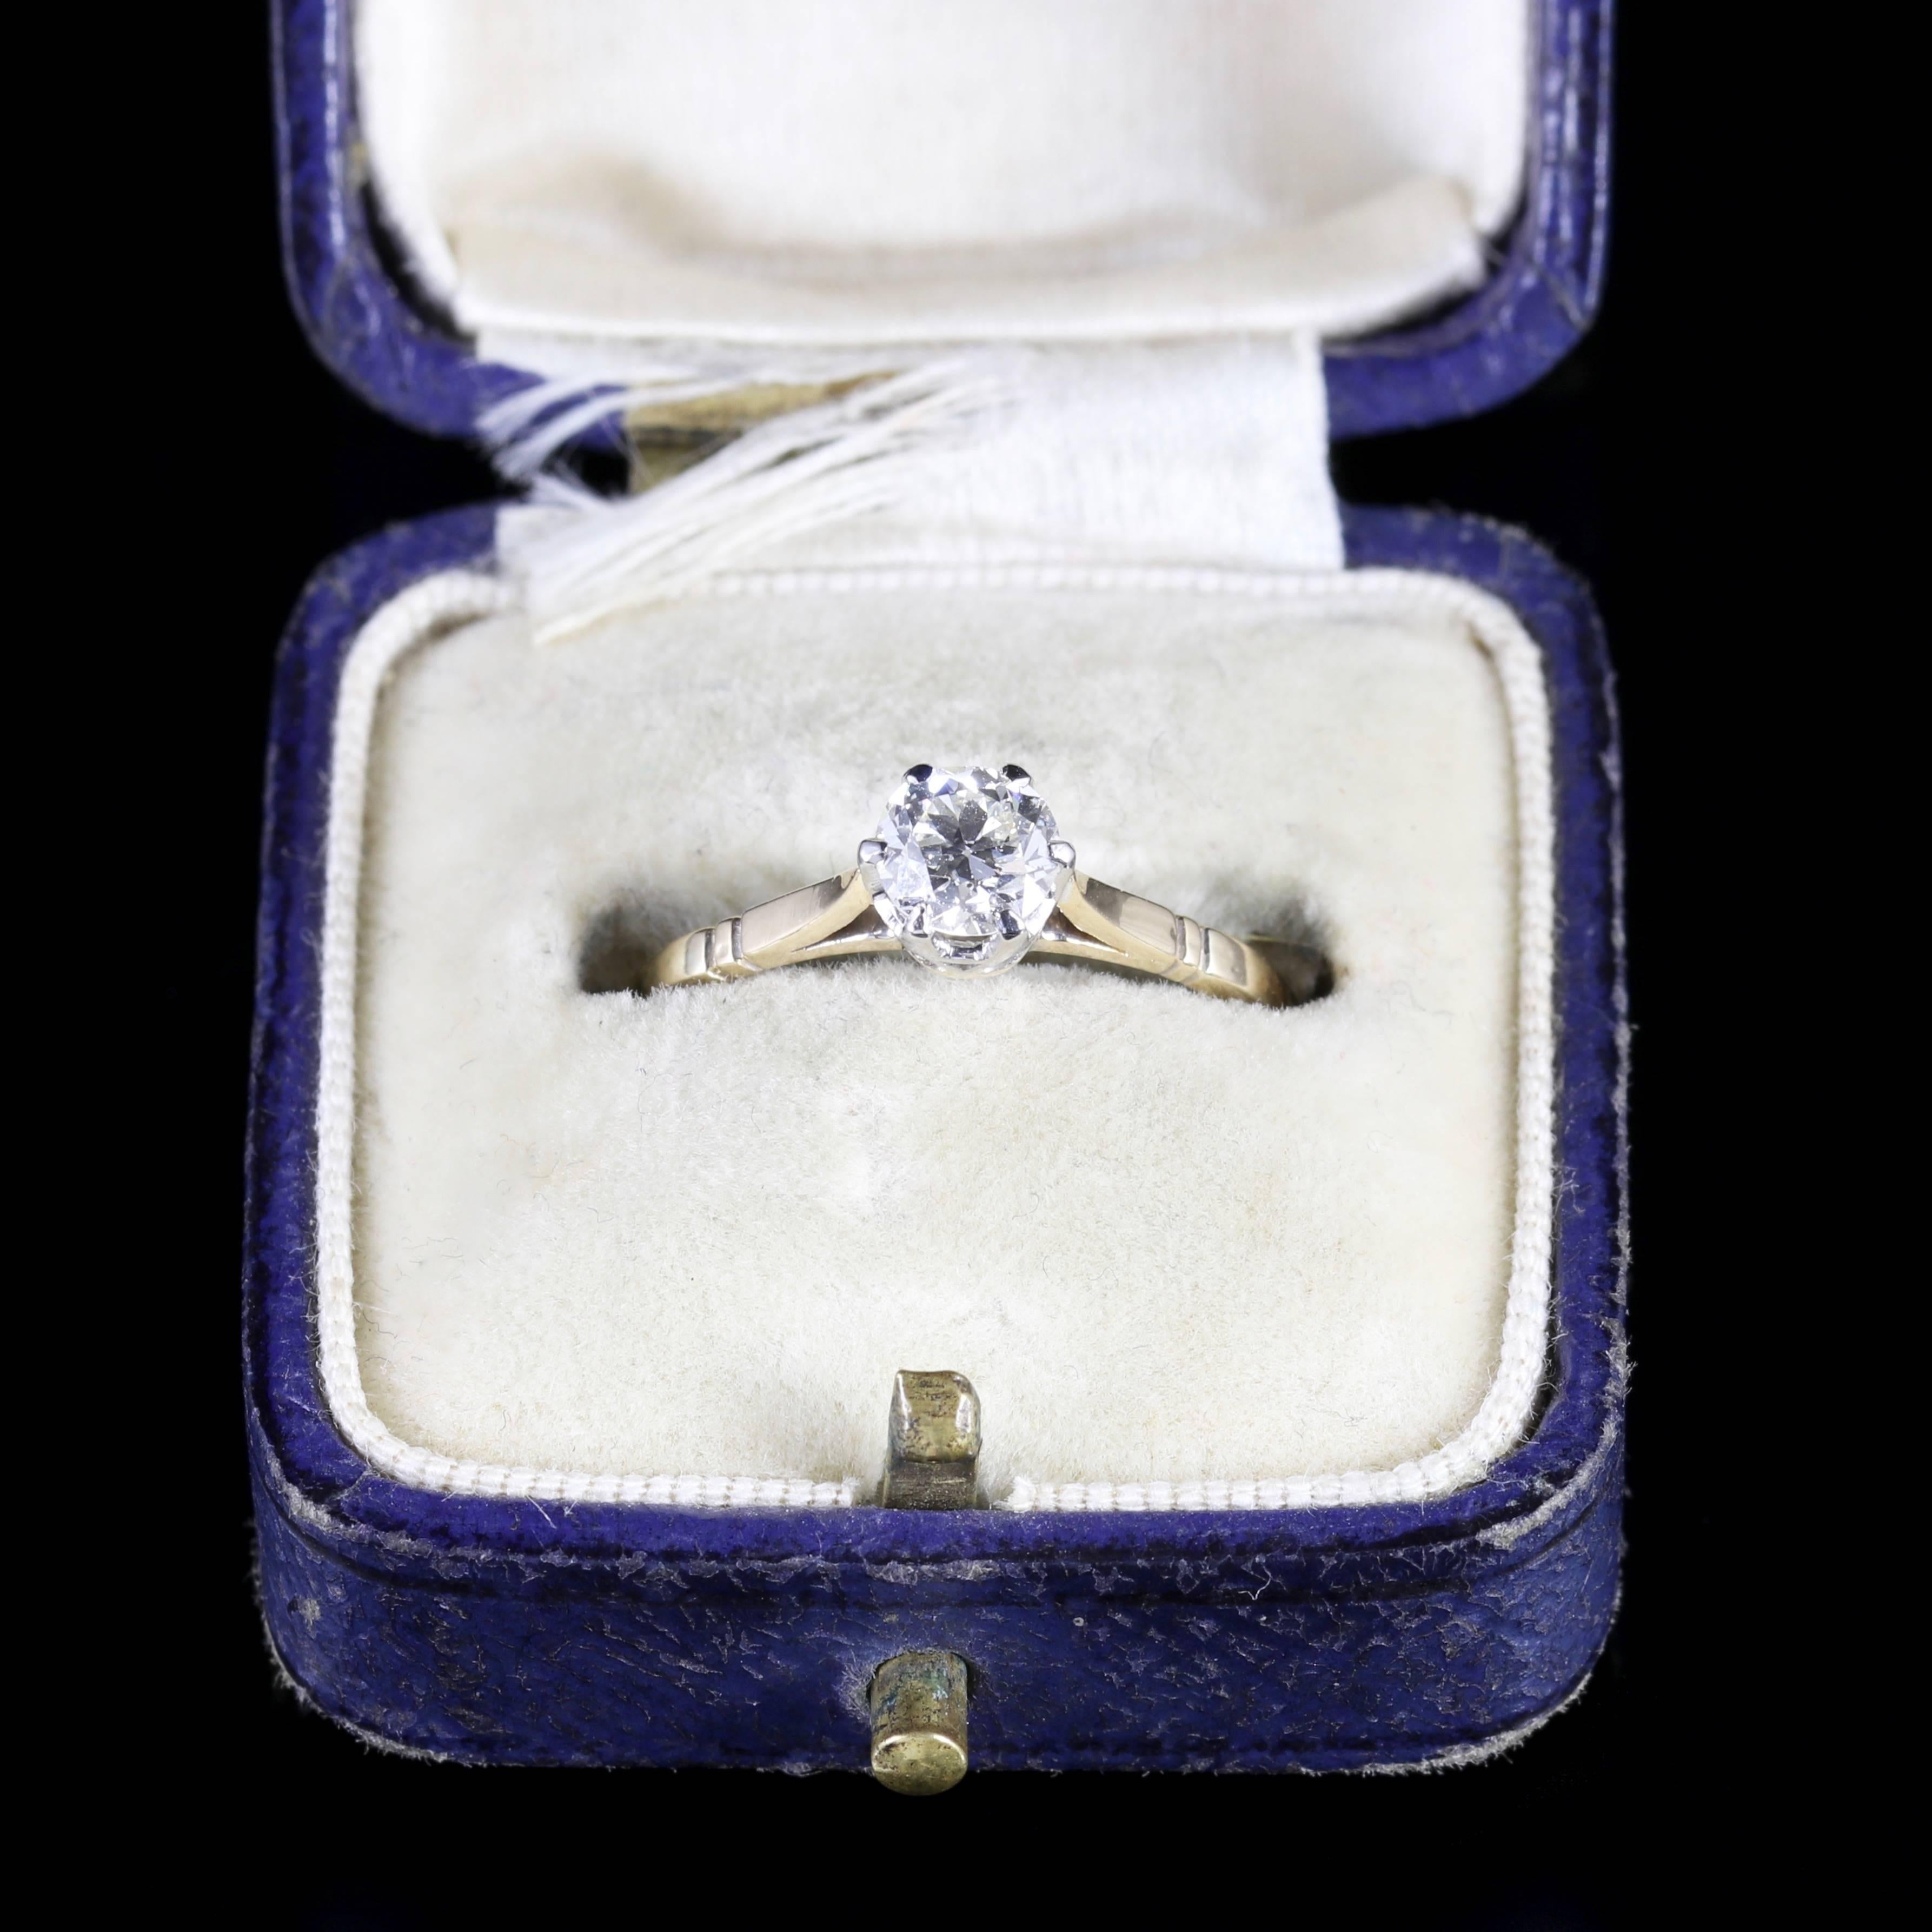 Edwardian Diamond Solitaire Ring 18 Carat Gold circa 1915 Engagement Ring For Sale 1